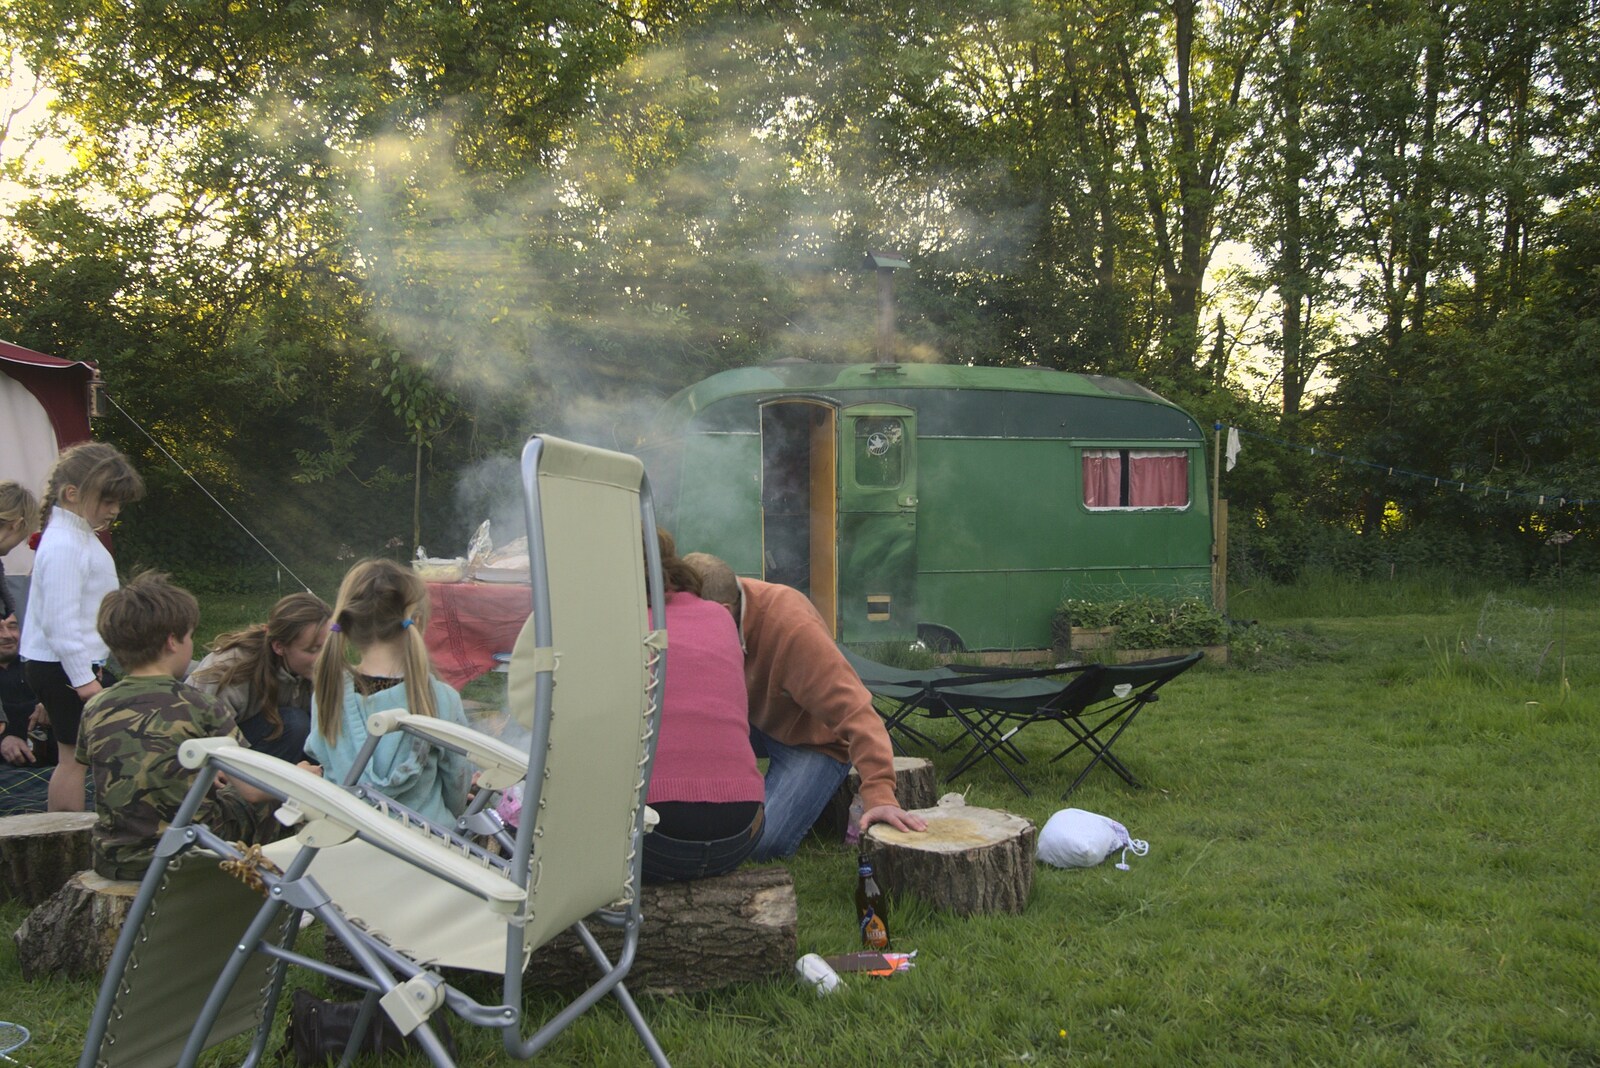 Smoke lingers over the old caravan from Martina's Birthday Barbeque, Thrandeston, Suffolk - 23rd May 2009